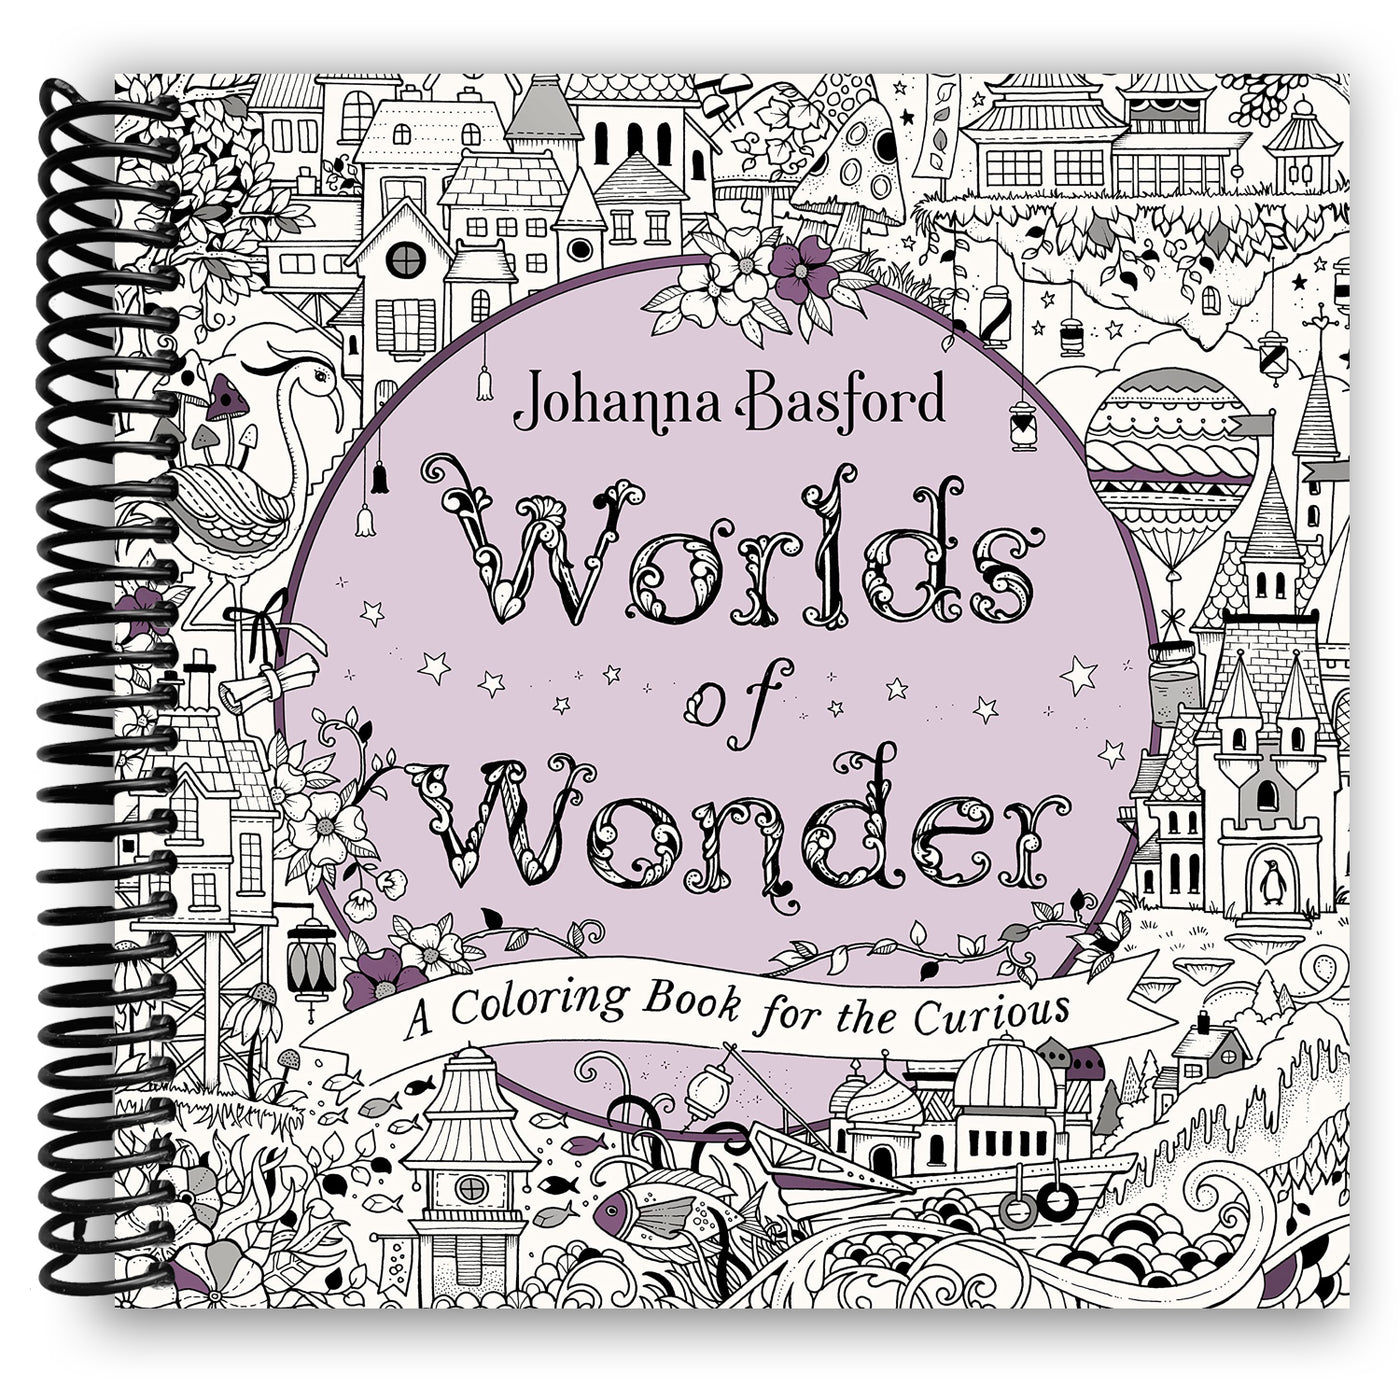  Worlds of Wonder: A Coloring Book for the Curious:  9780143136064: Basford, Johanna: Books